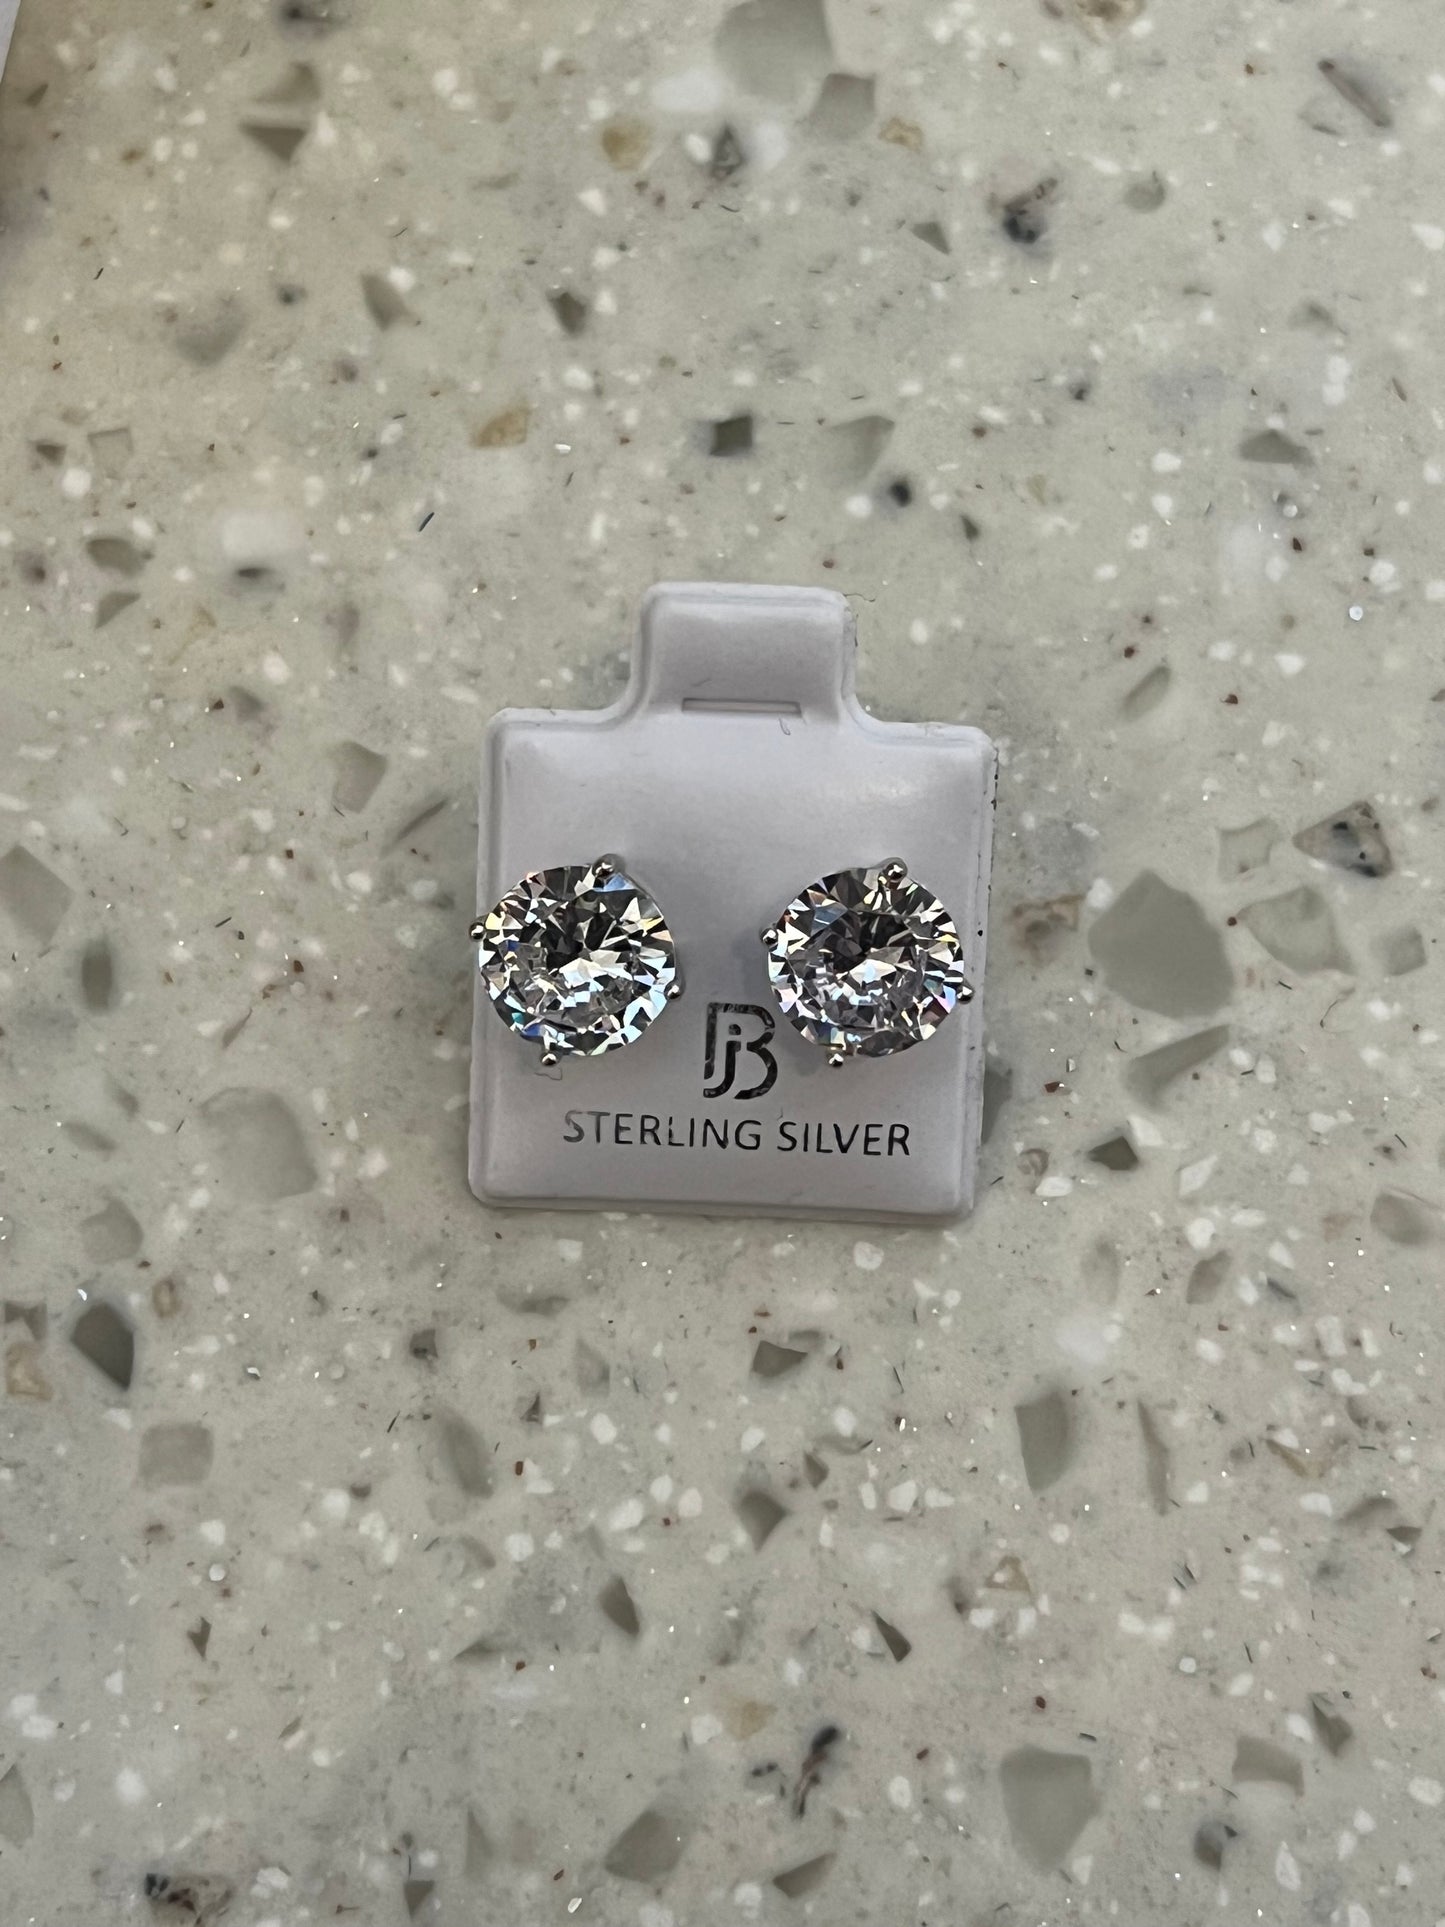 925 Sterling Silver Rhodium Plated Round Prong Set CZ Earrings Butterfly Back